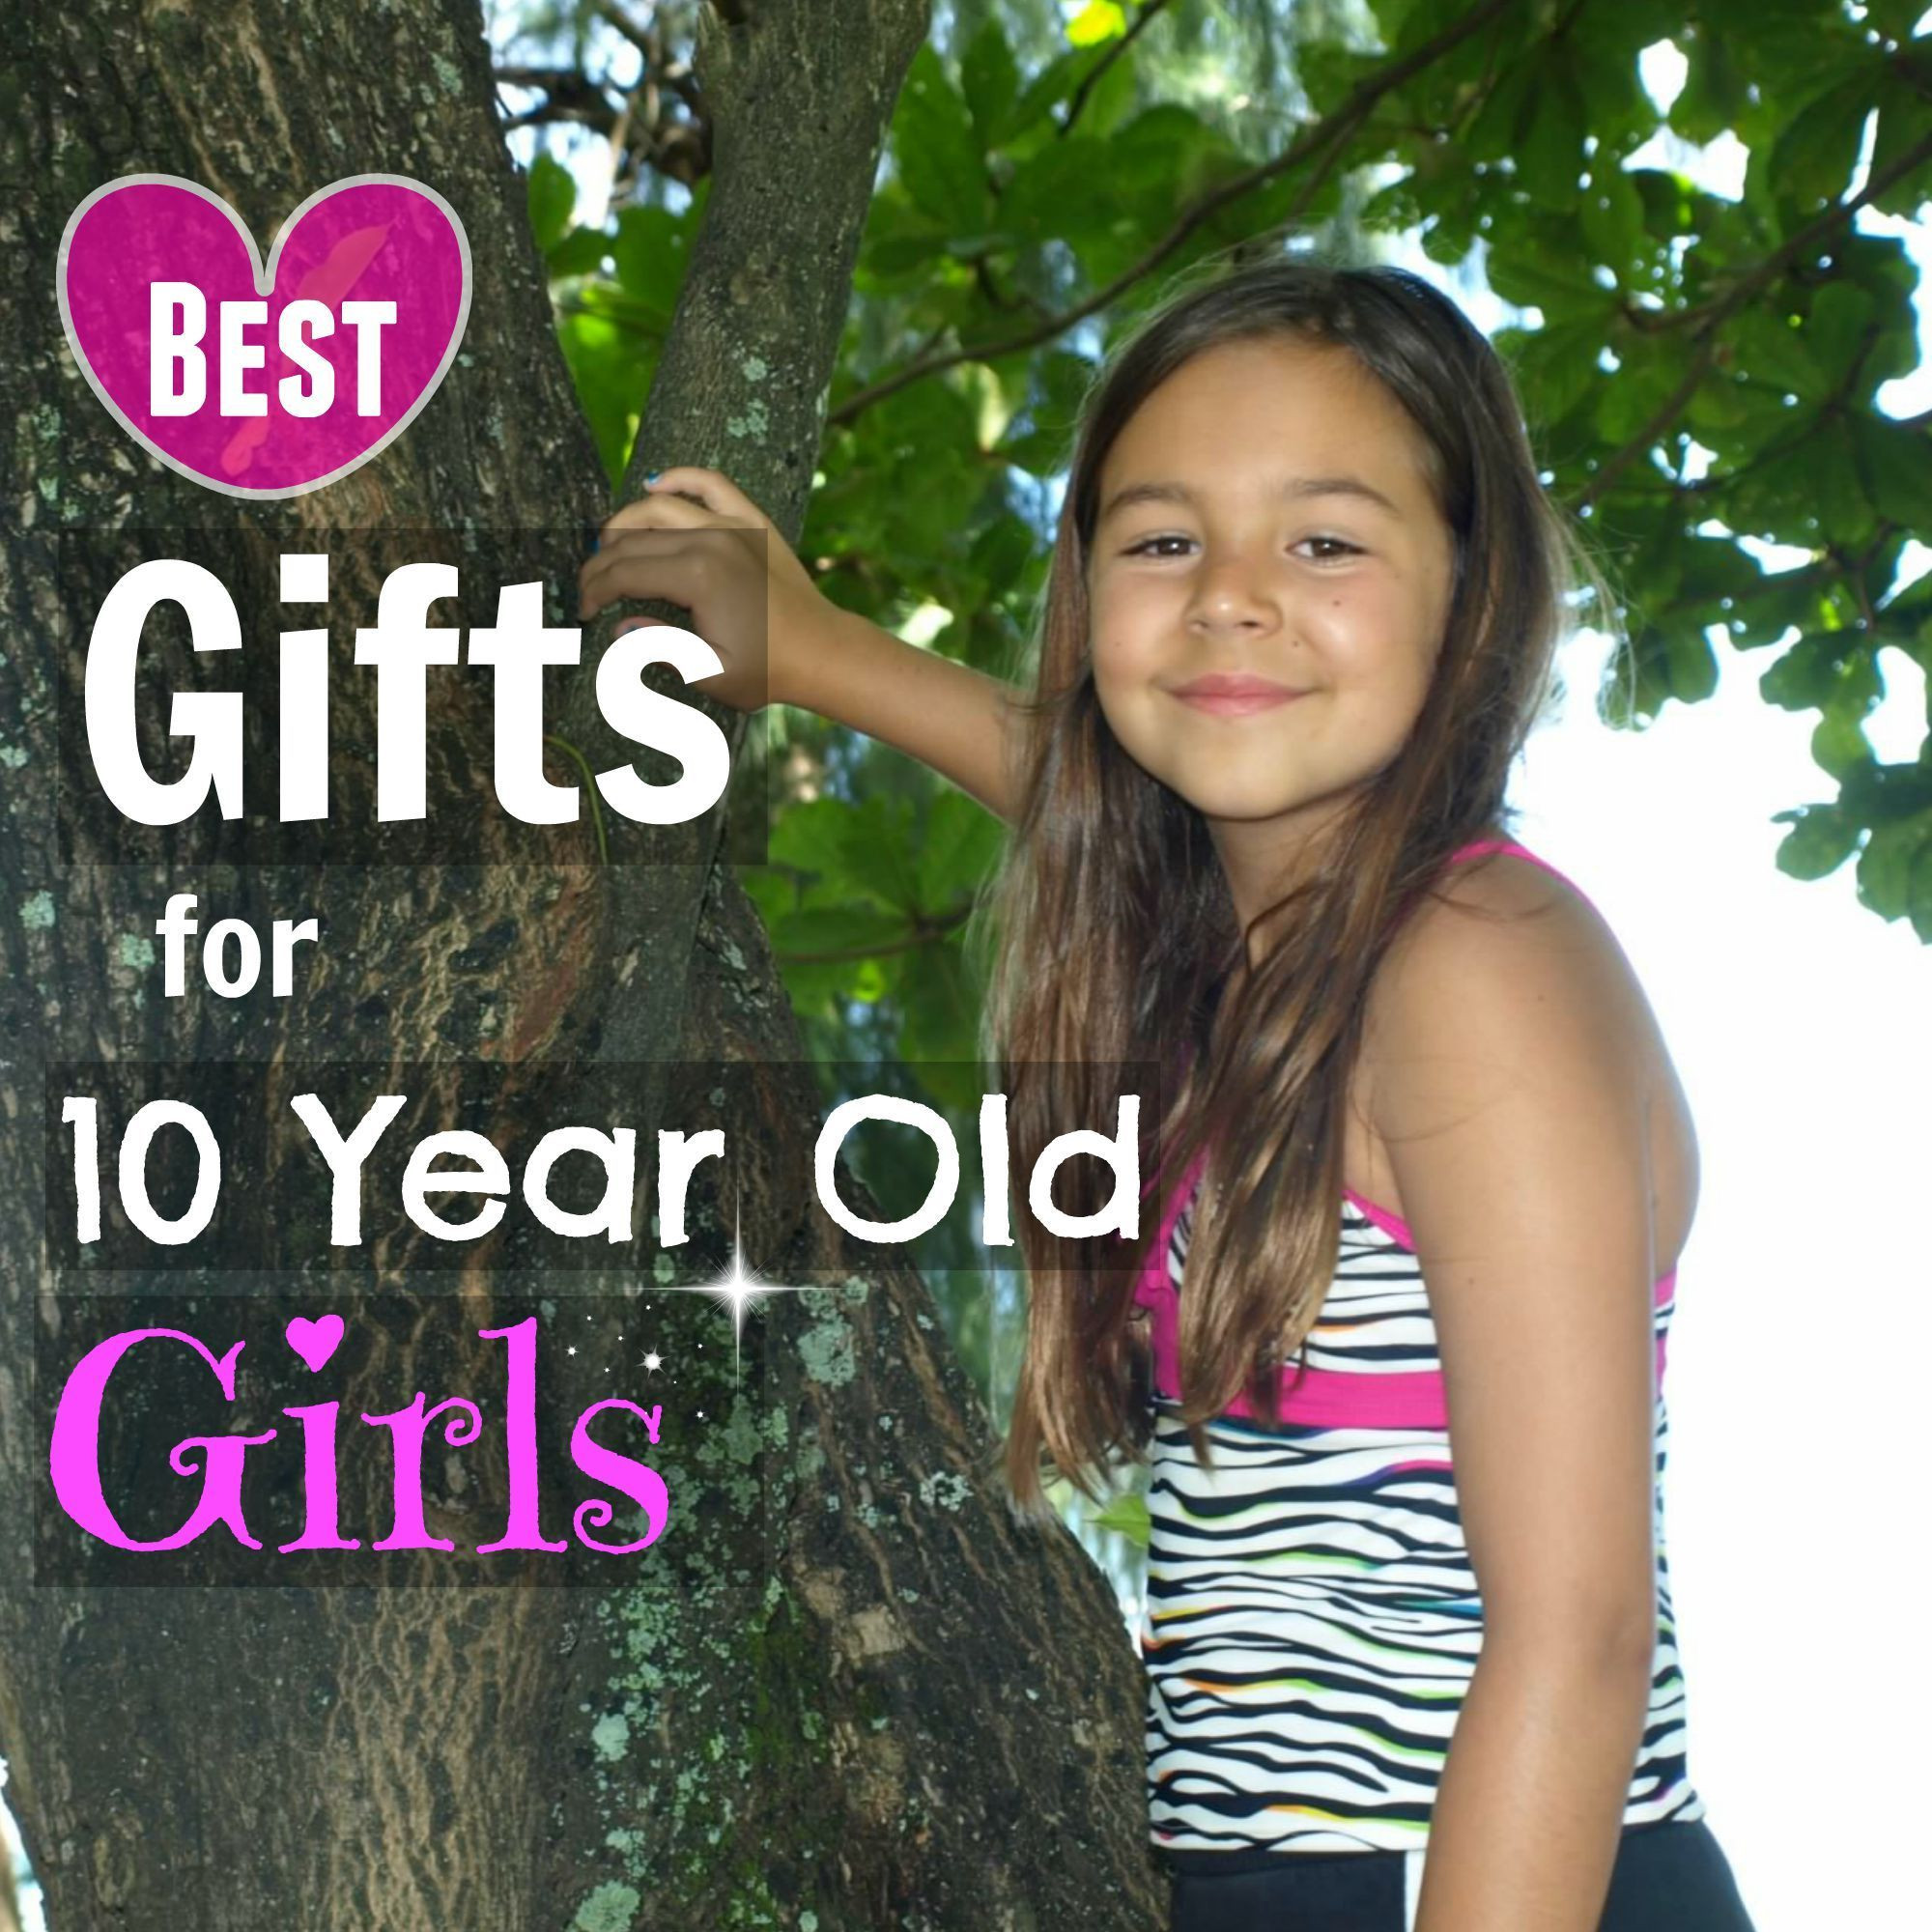 Gift Ideas For 10 Yr Old Girls
 Best Christmas Toys for 10 Year Old Girls 2017